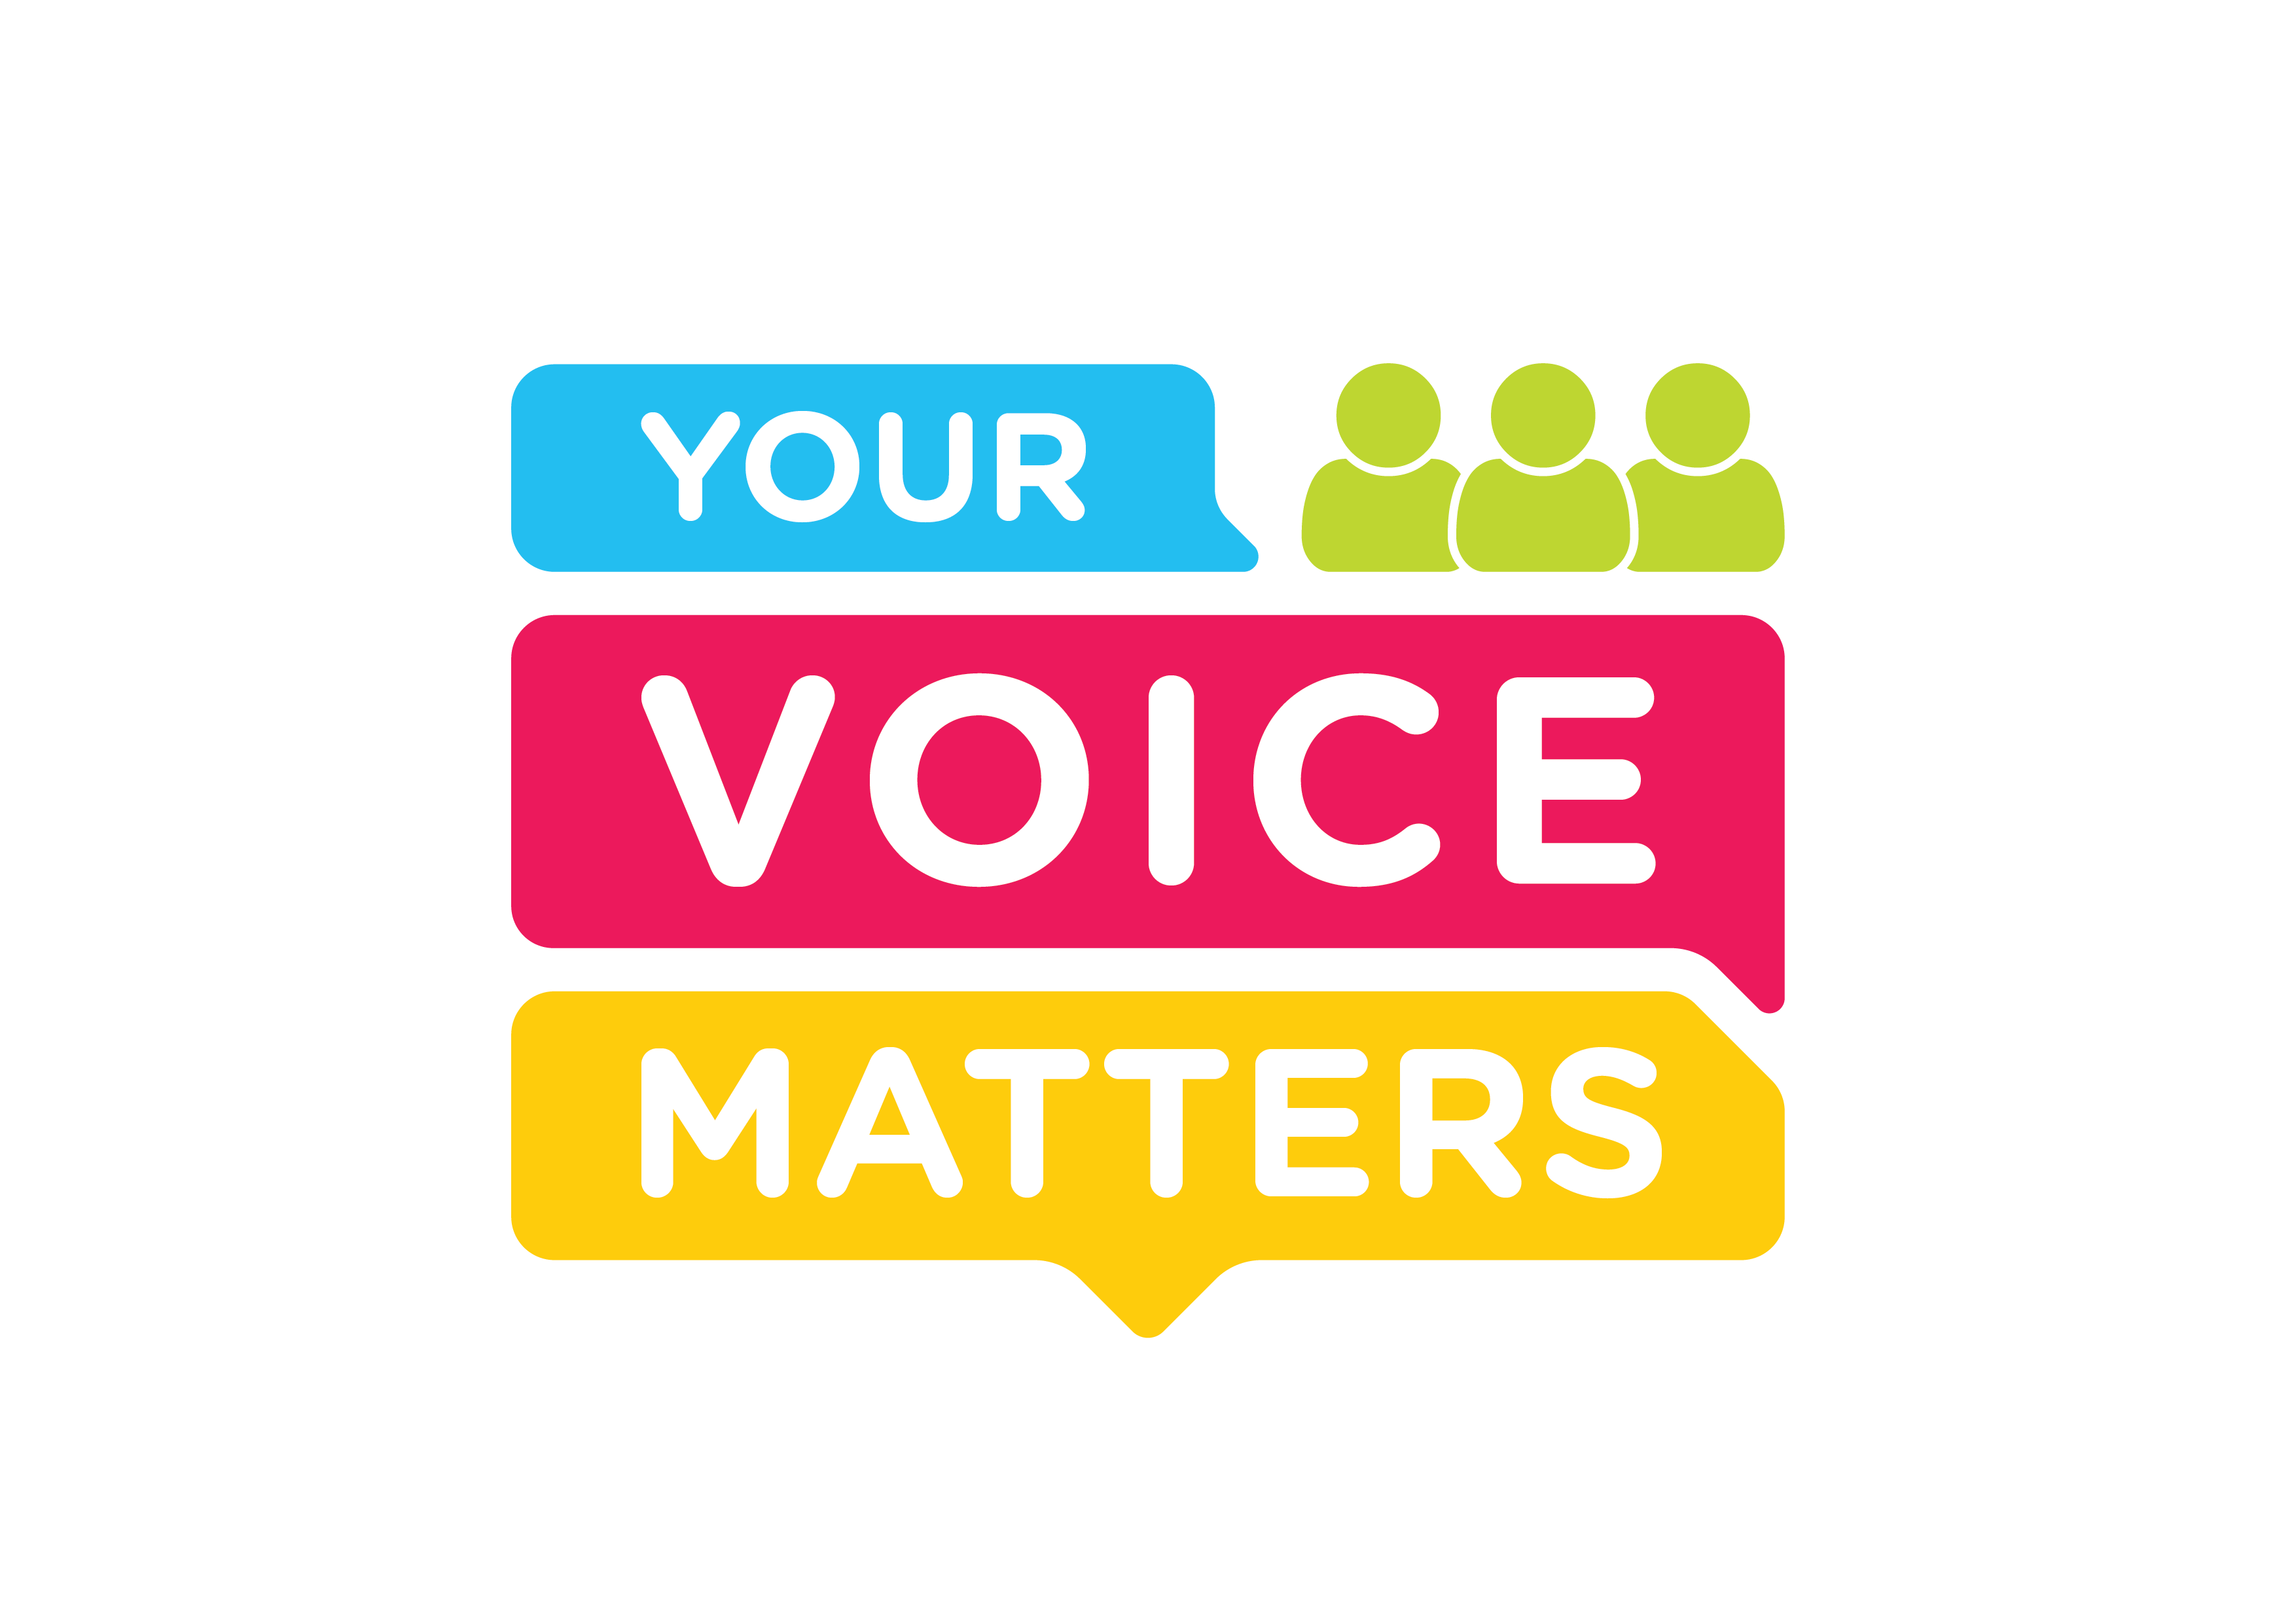 Your Voice Matters - HSE.ie